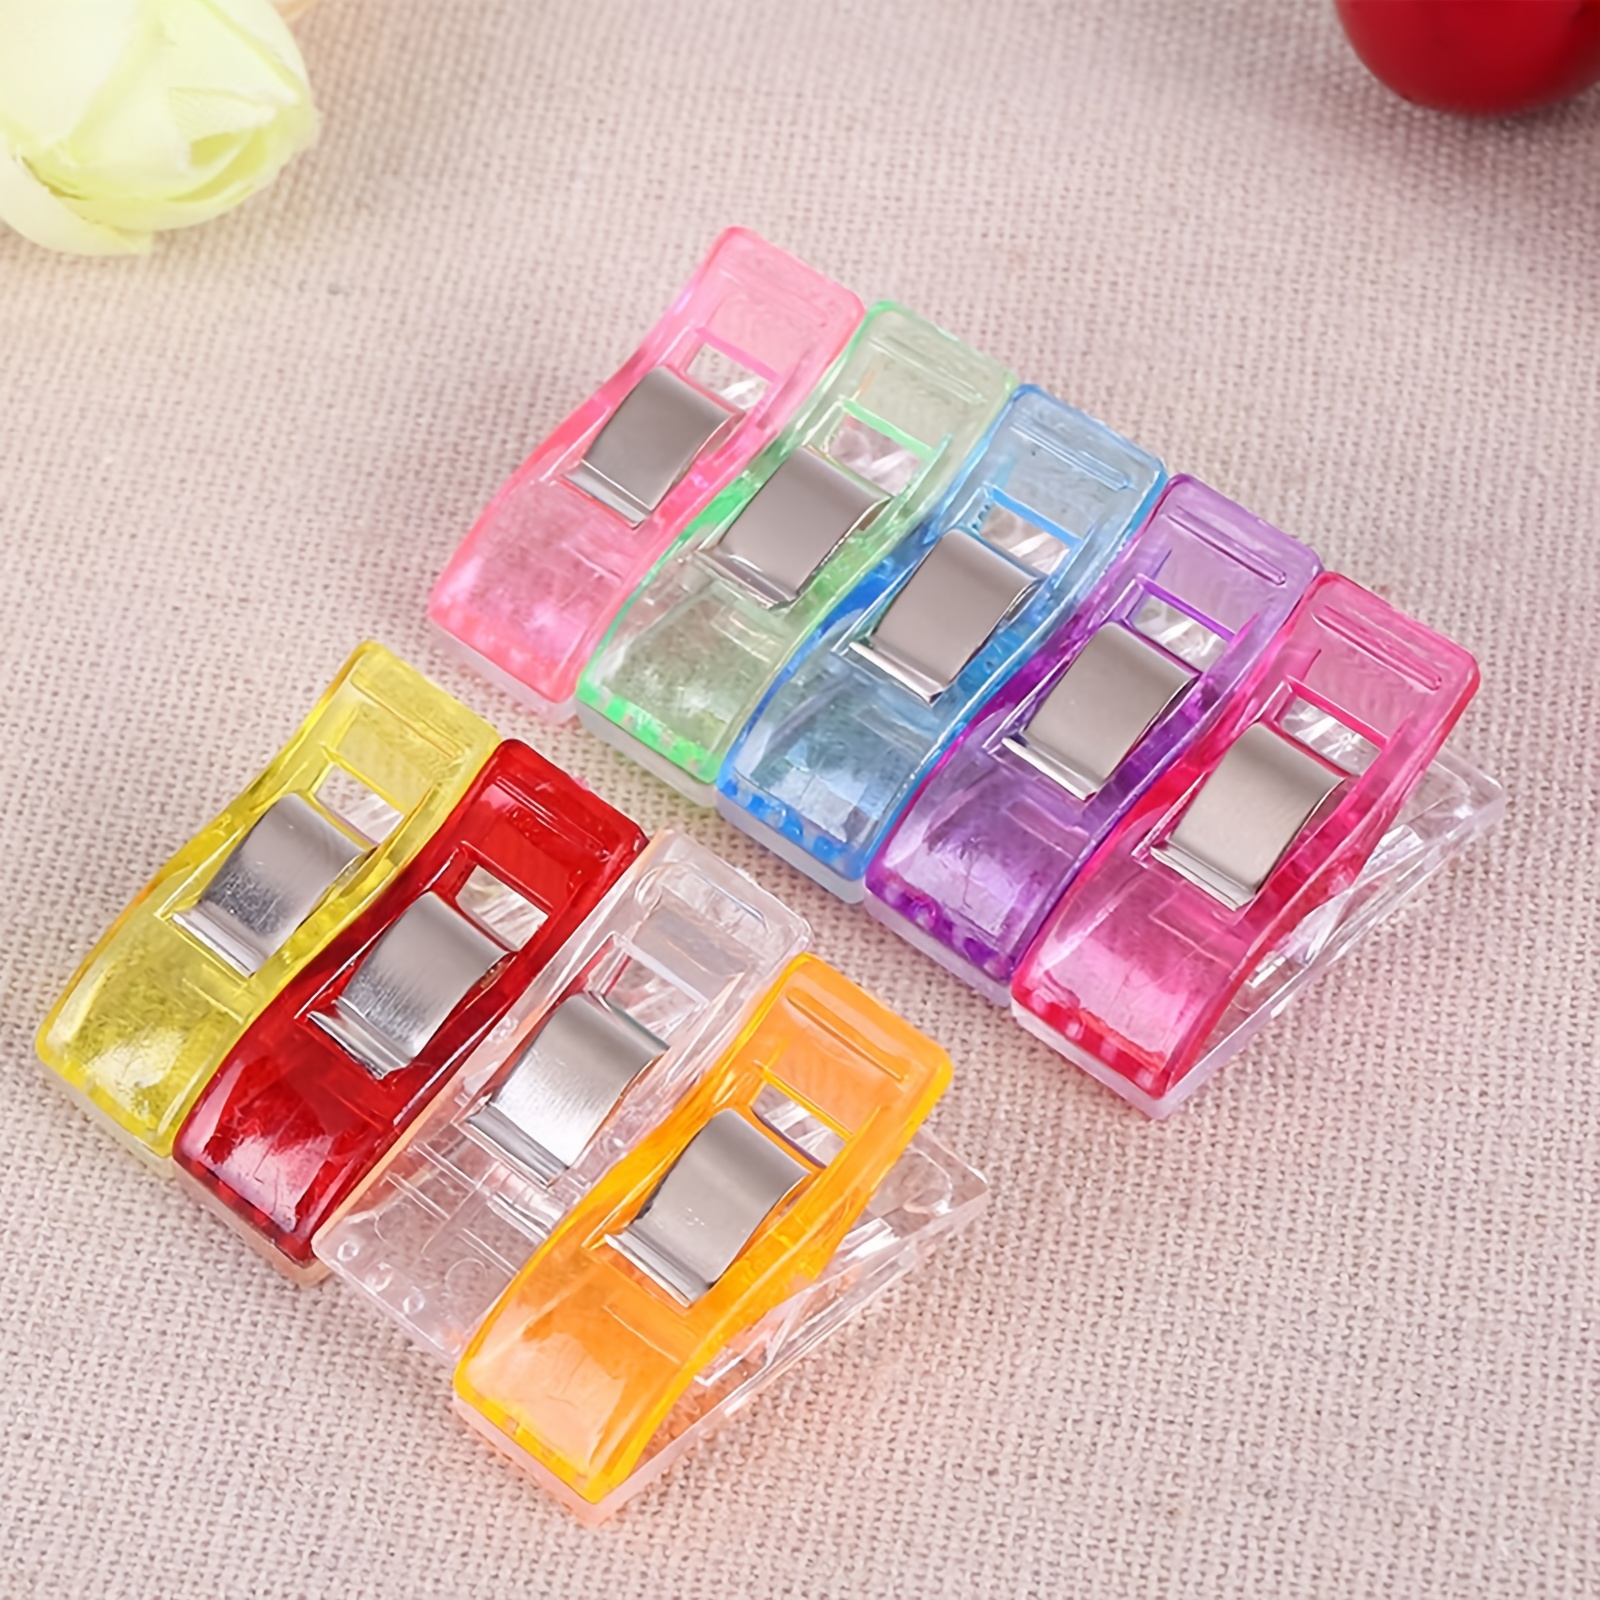 150 PCS Multipurpose Sewing Clips, Clips for Sewing, Quilting Clips for  Fabric Sewing Binding Crafting, Assorted Bright Colors